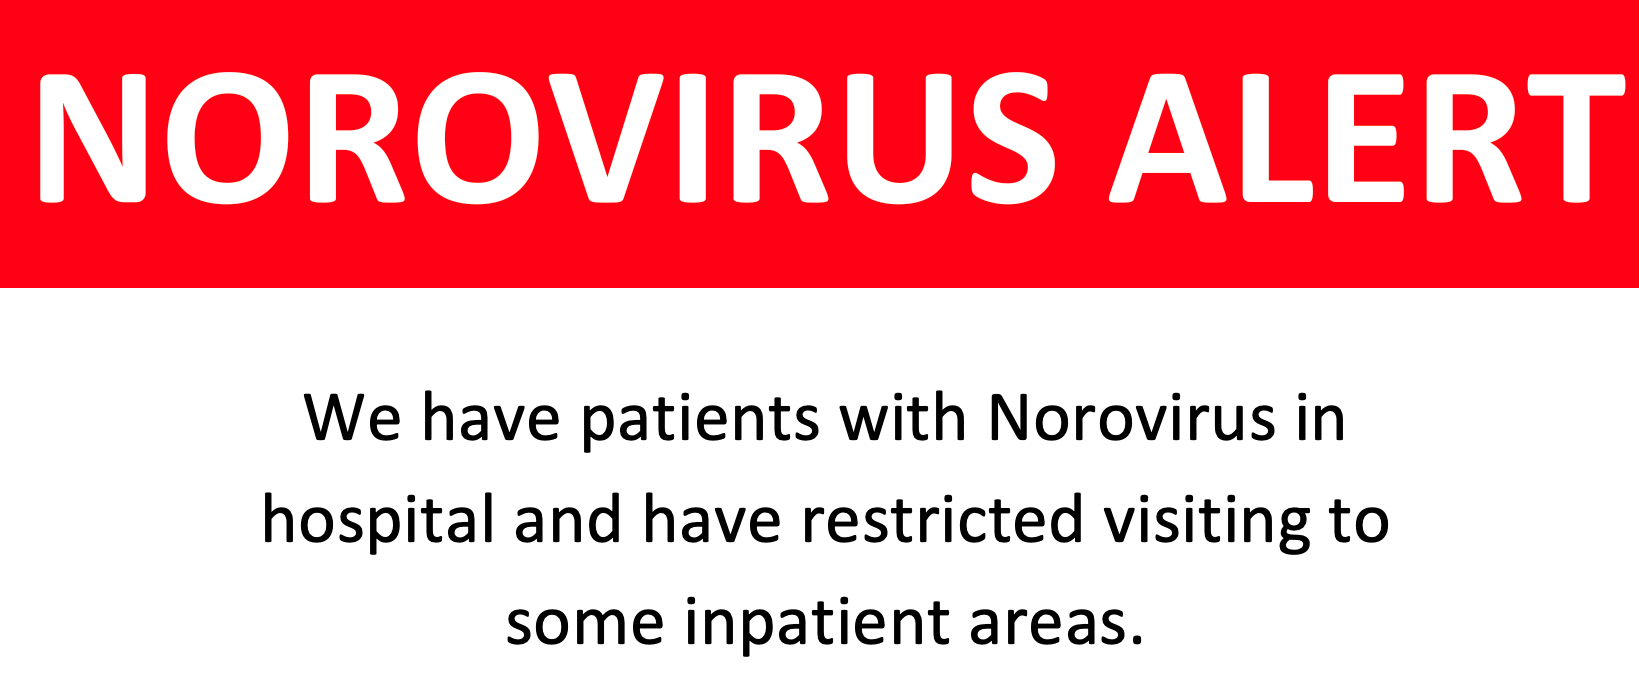 Norovirus Alert. We have patients with Norovirus in hospital and have restricted visiting to some inpatient areas.